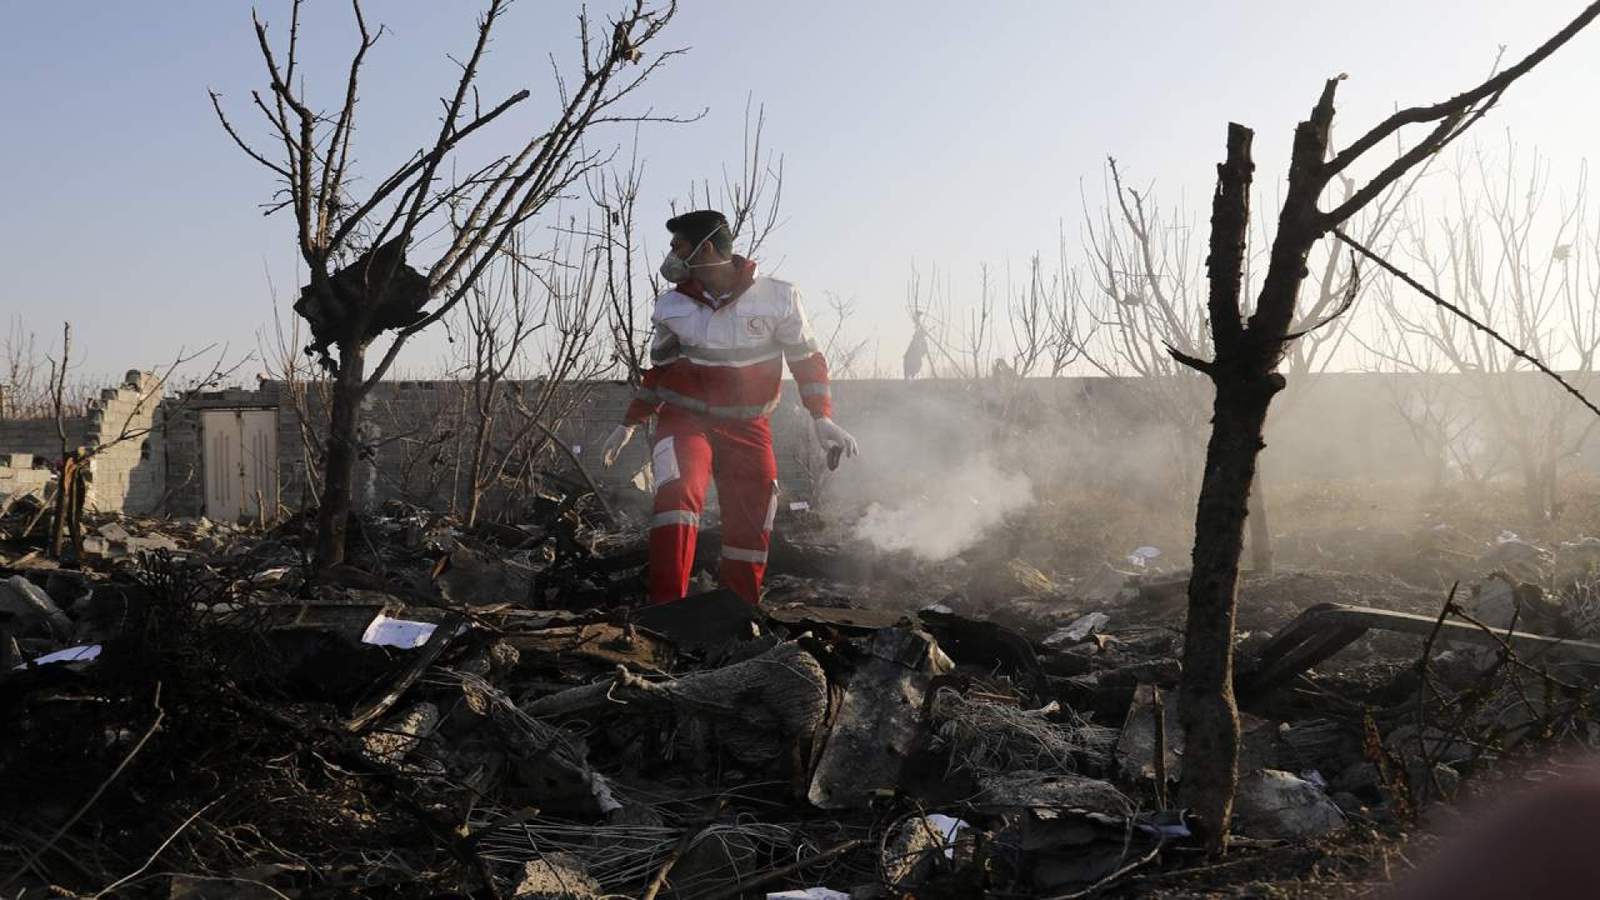 US officials: ‘Highly likely’ Iran downed Ukrainian jetliner